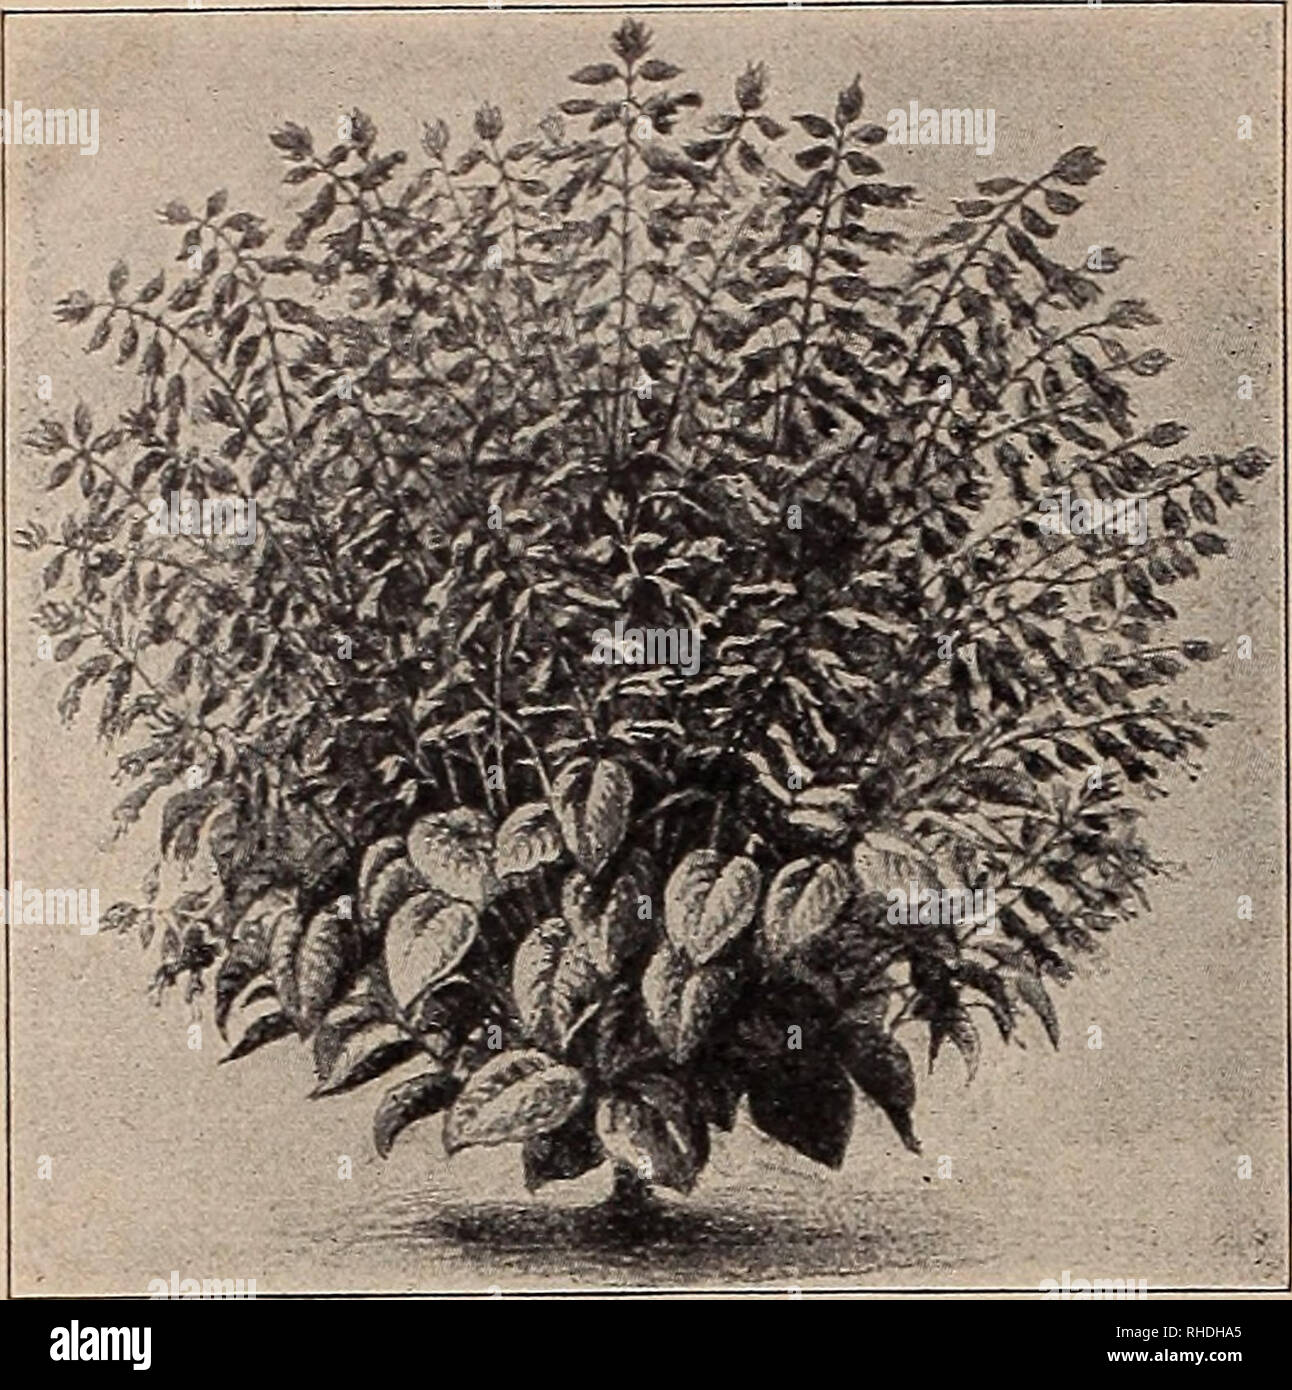 . Book for florists. Flowers Seeds Catalogs; Bulbs (Plants) Seedlings Catalogs; Vegetables Seeds Catalogs; Trees Seeds Catalogs; Horticulture Equipment and supplies Catalogs. Scabiosa SALVIA Splendcns, Fireball Trade pit. Oz. Eosa Polyantha Nana $0.20 $0.80 Eudbeckia Bicolor Superba. Large 10 Bicolor Superba, semi-plena 15 Saintpaulia Ionantlia. Charming deep blue flower- ing pot plant which blossoms in uninterrupted succession 100 .40 .80 Salpiglossis This family is illustrated in colors on the front our 1928 Illustrated Catalog. Large-Flowering. Mixed extra choice Superbissima (Emperor). Cri Stock Photo